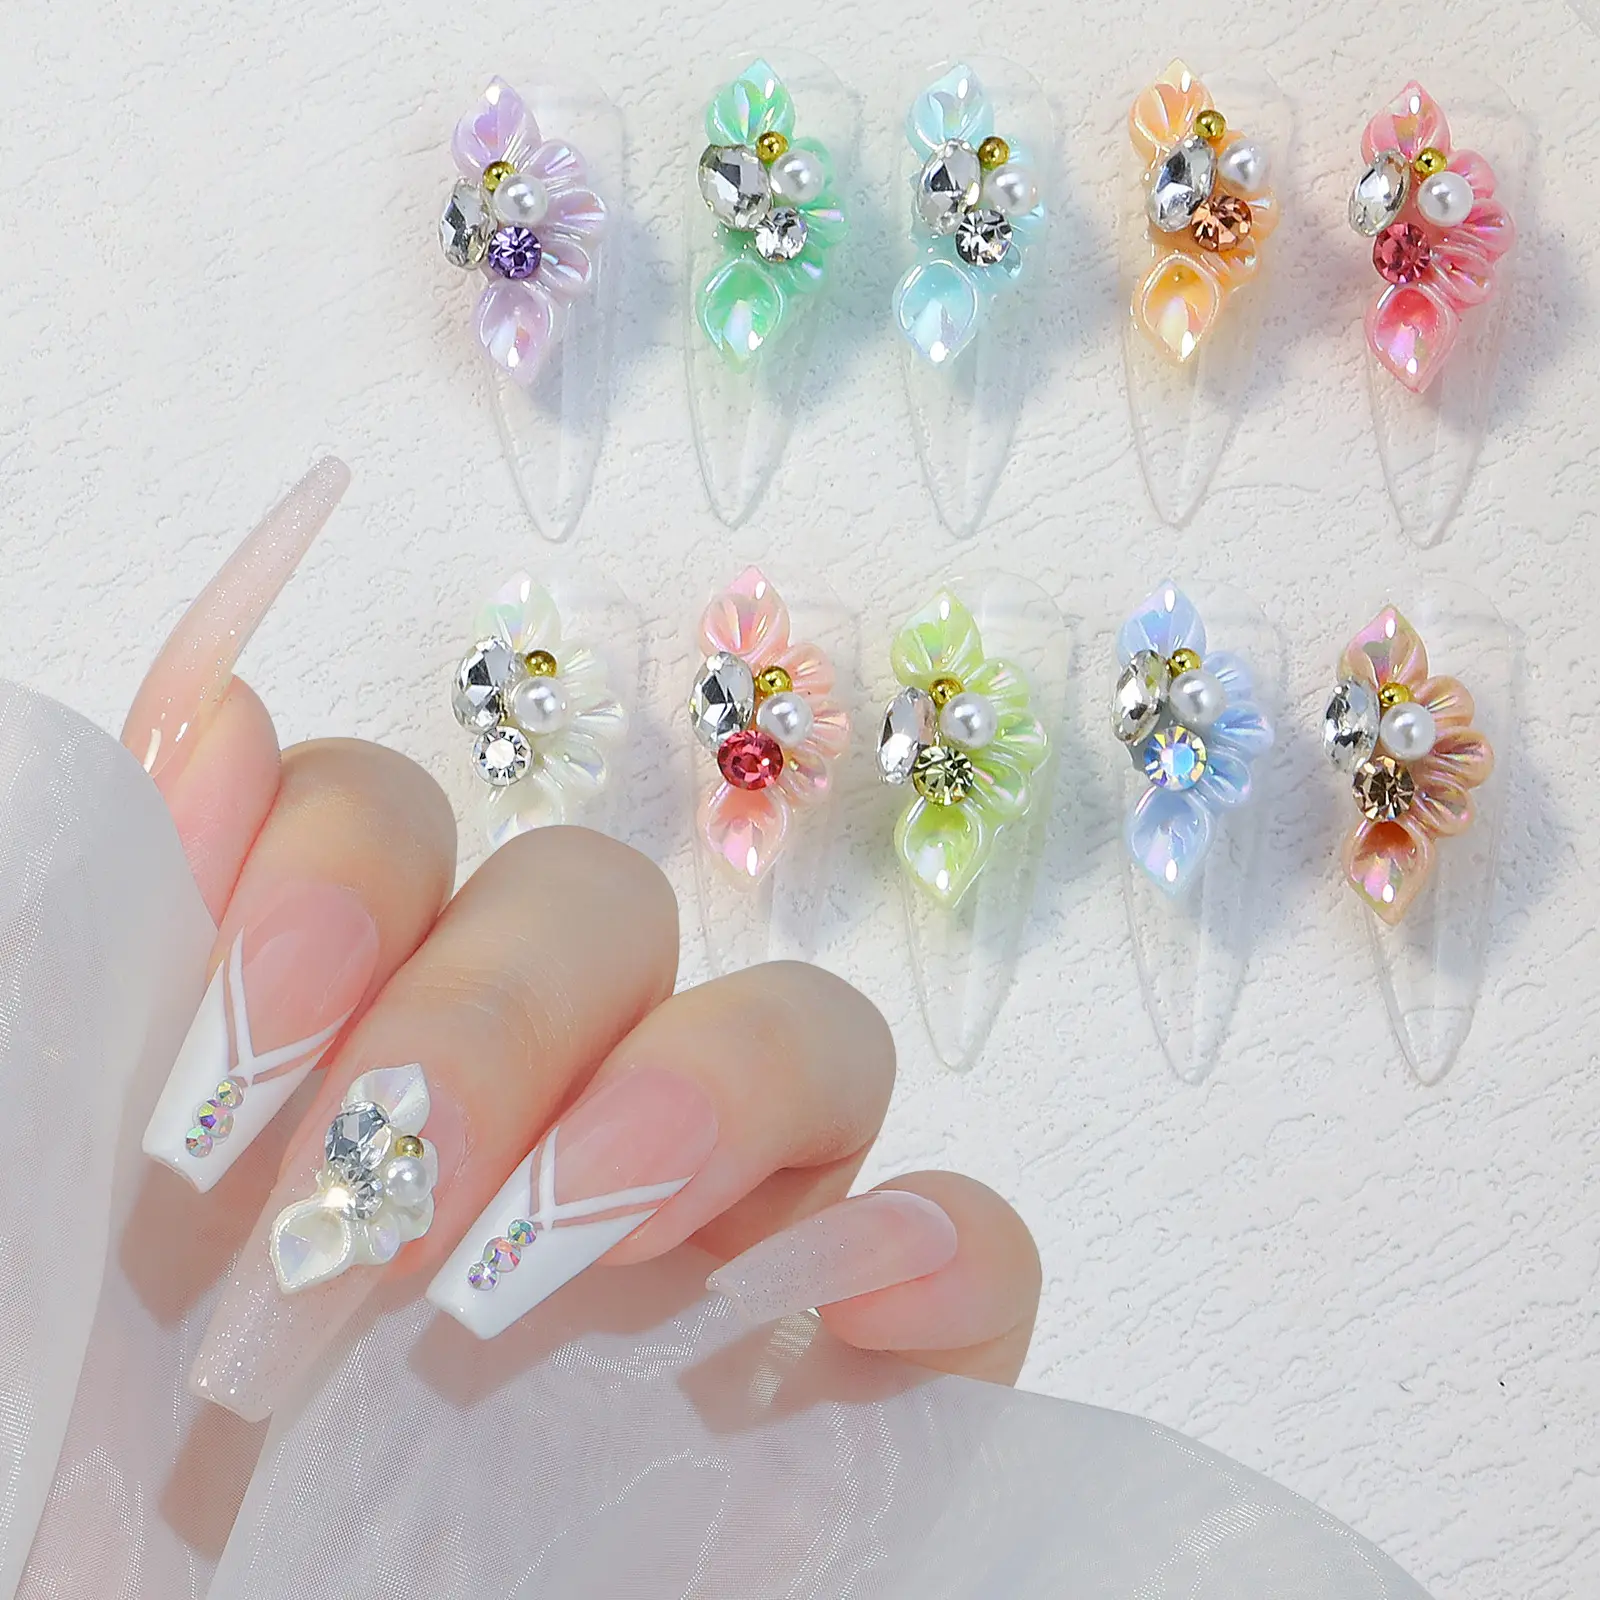 MISSBLOOM Nails Accessories 2022 Handmade Embossed Flowers 3D Designer Luxury Resin Charms Nail Art Decoration Supplies